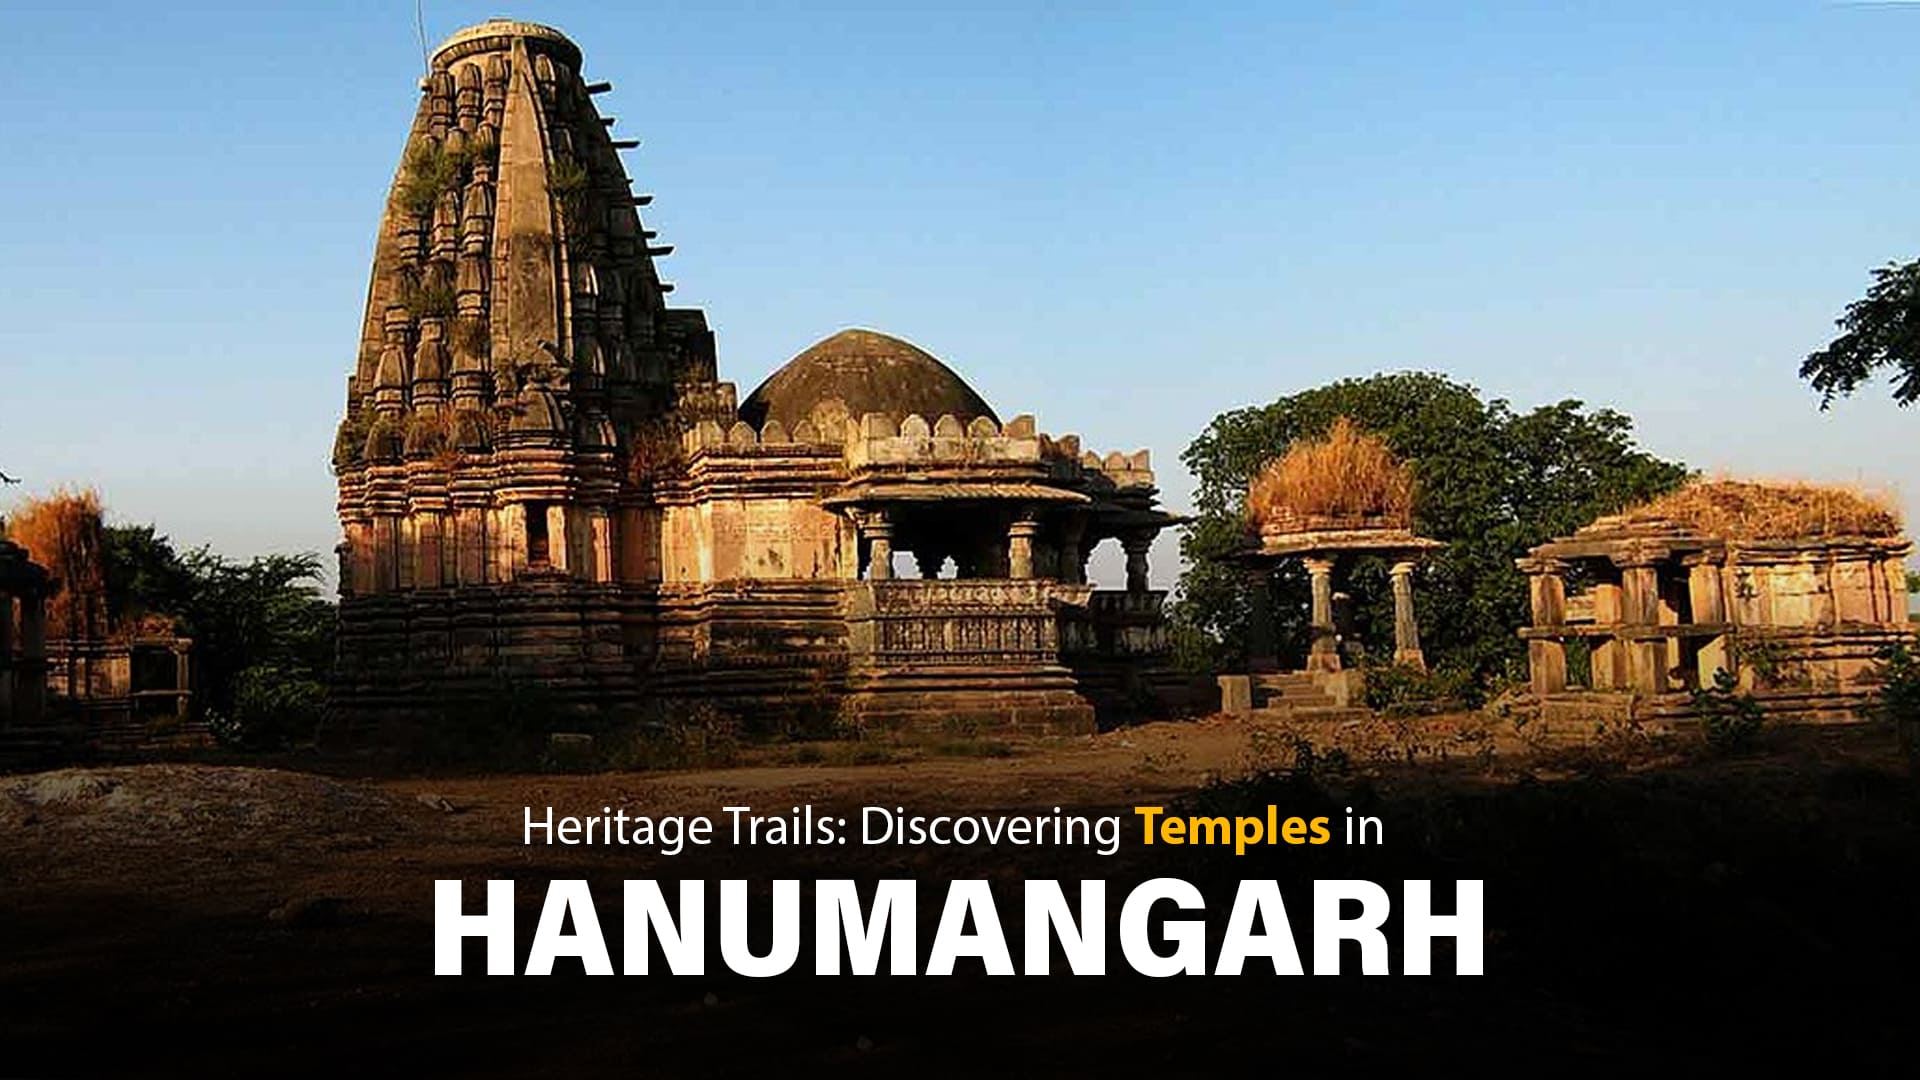 Heritage Trails: Discovering Temples in Hanumangarh